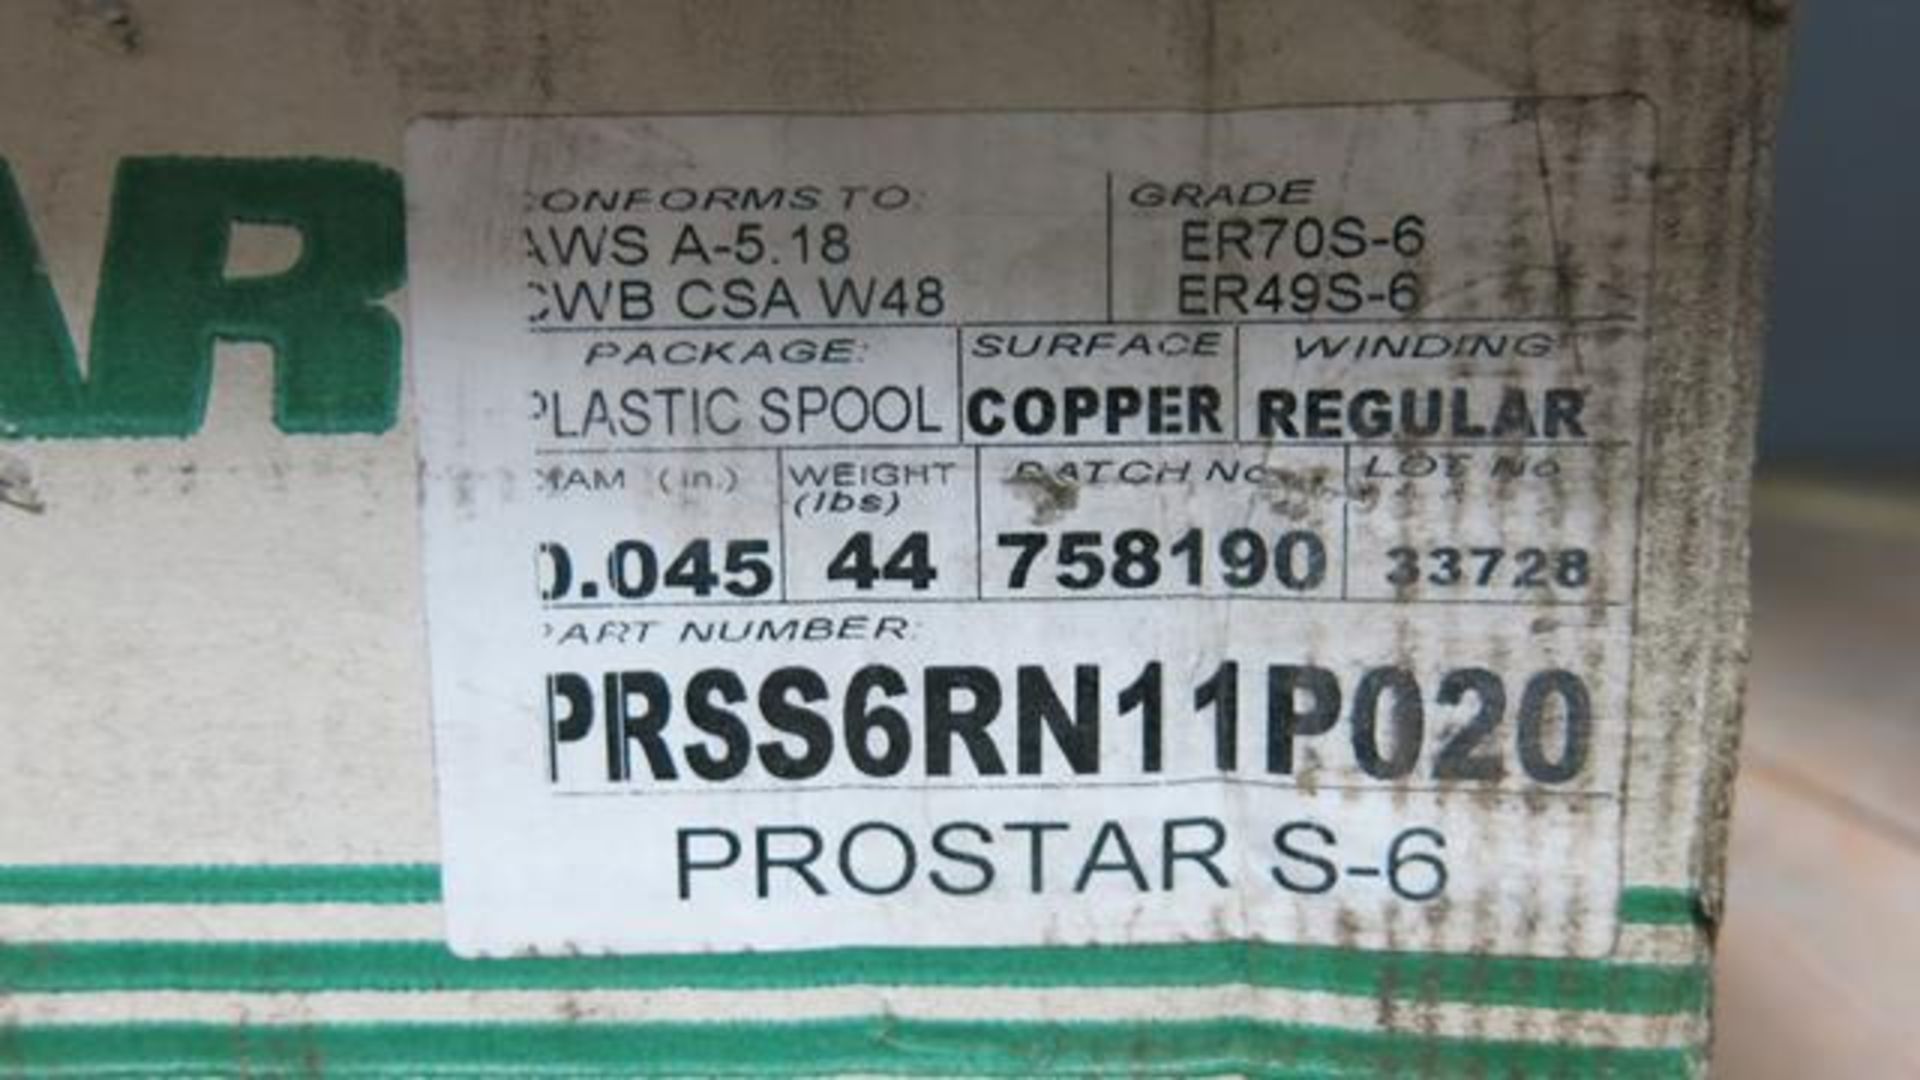 LOT OF (3) PROSTAR, PRSS6RN11P020, COPPER, 0.045", WELDING WIRE ROLLS AND (1) PROSTAR, PRS70S6- - Image 4 of 5